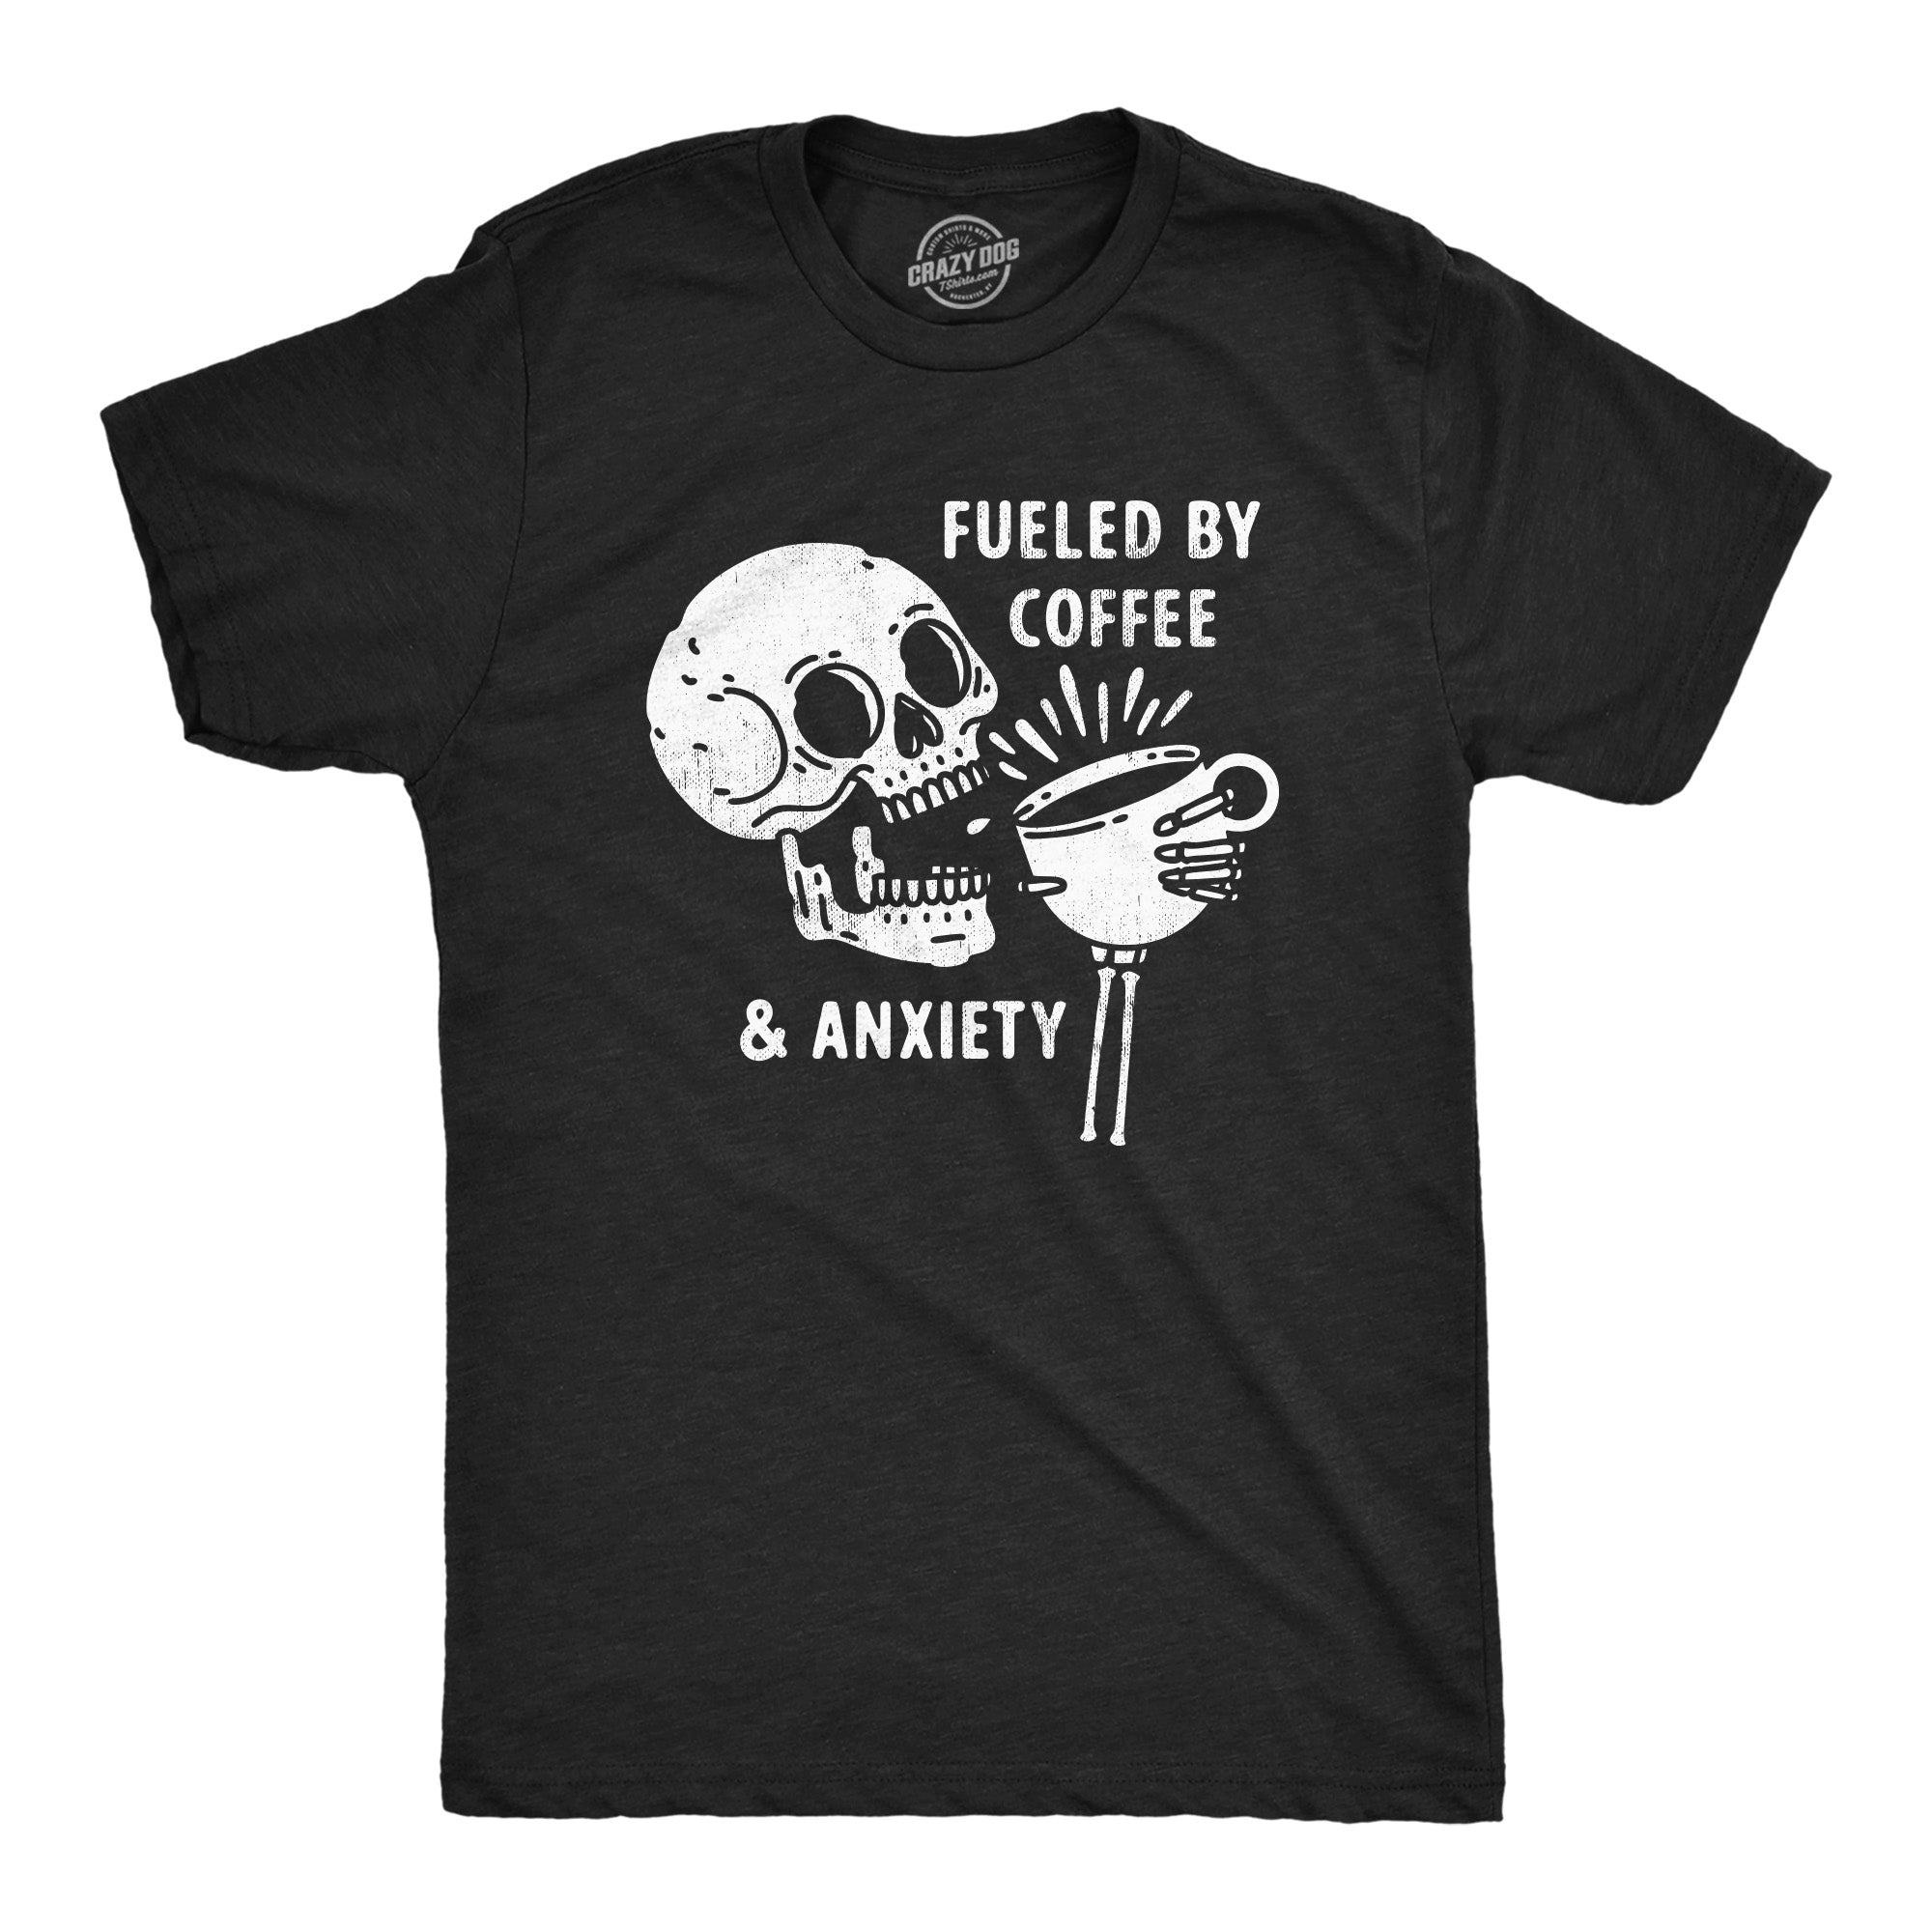 Funny Heather Black - ANXIETY Fueled By Coffee And Anxiety Mens T Shirt Nerdy Coffee Sarcastic Tee